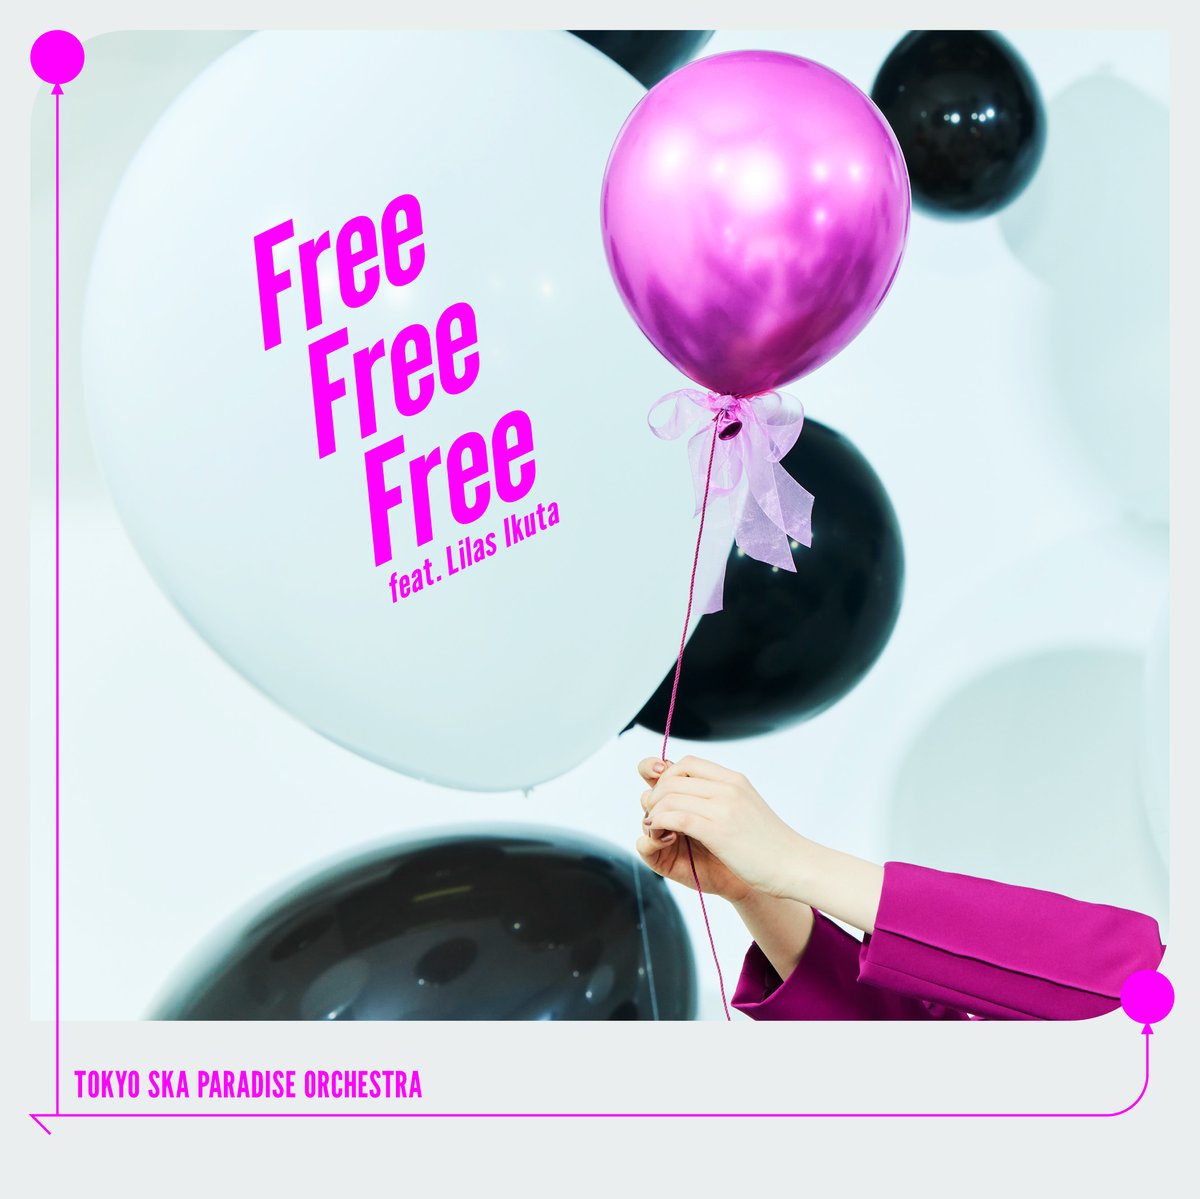 Cover for『TOKYO SKA PARADISE ORCHESTRA - Free Free Free feat. Ikuta Lilas』from the release『Free Free Free feat. Ikuta Lilas』